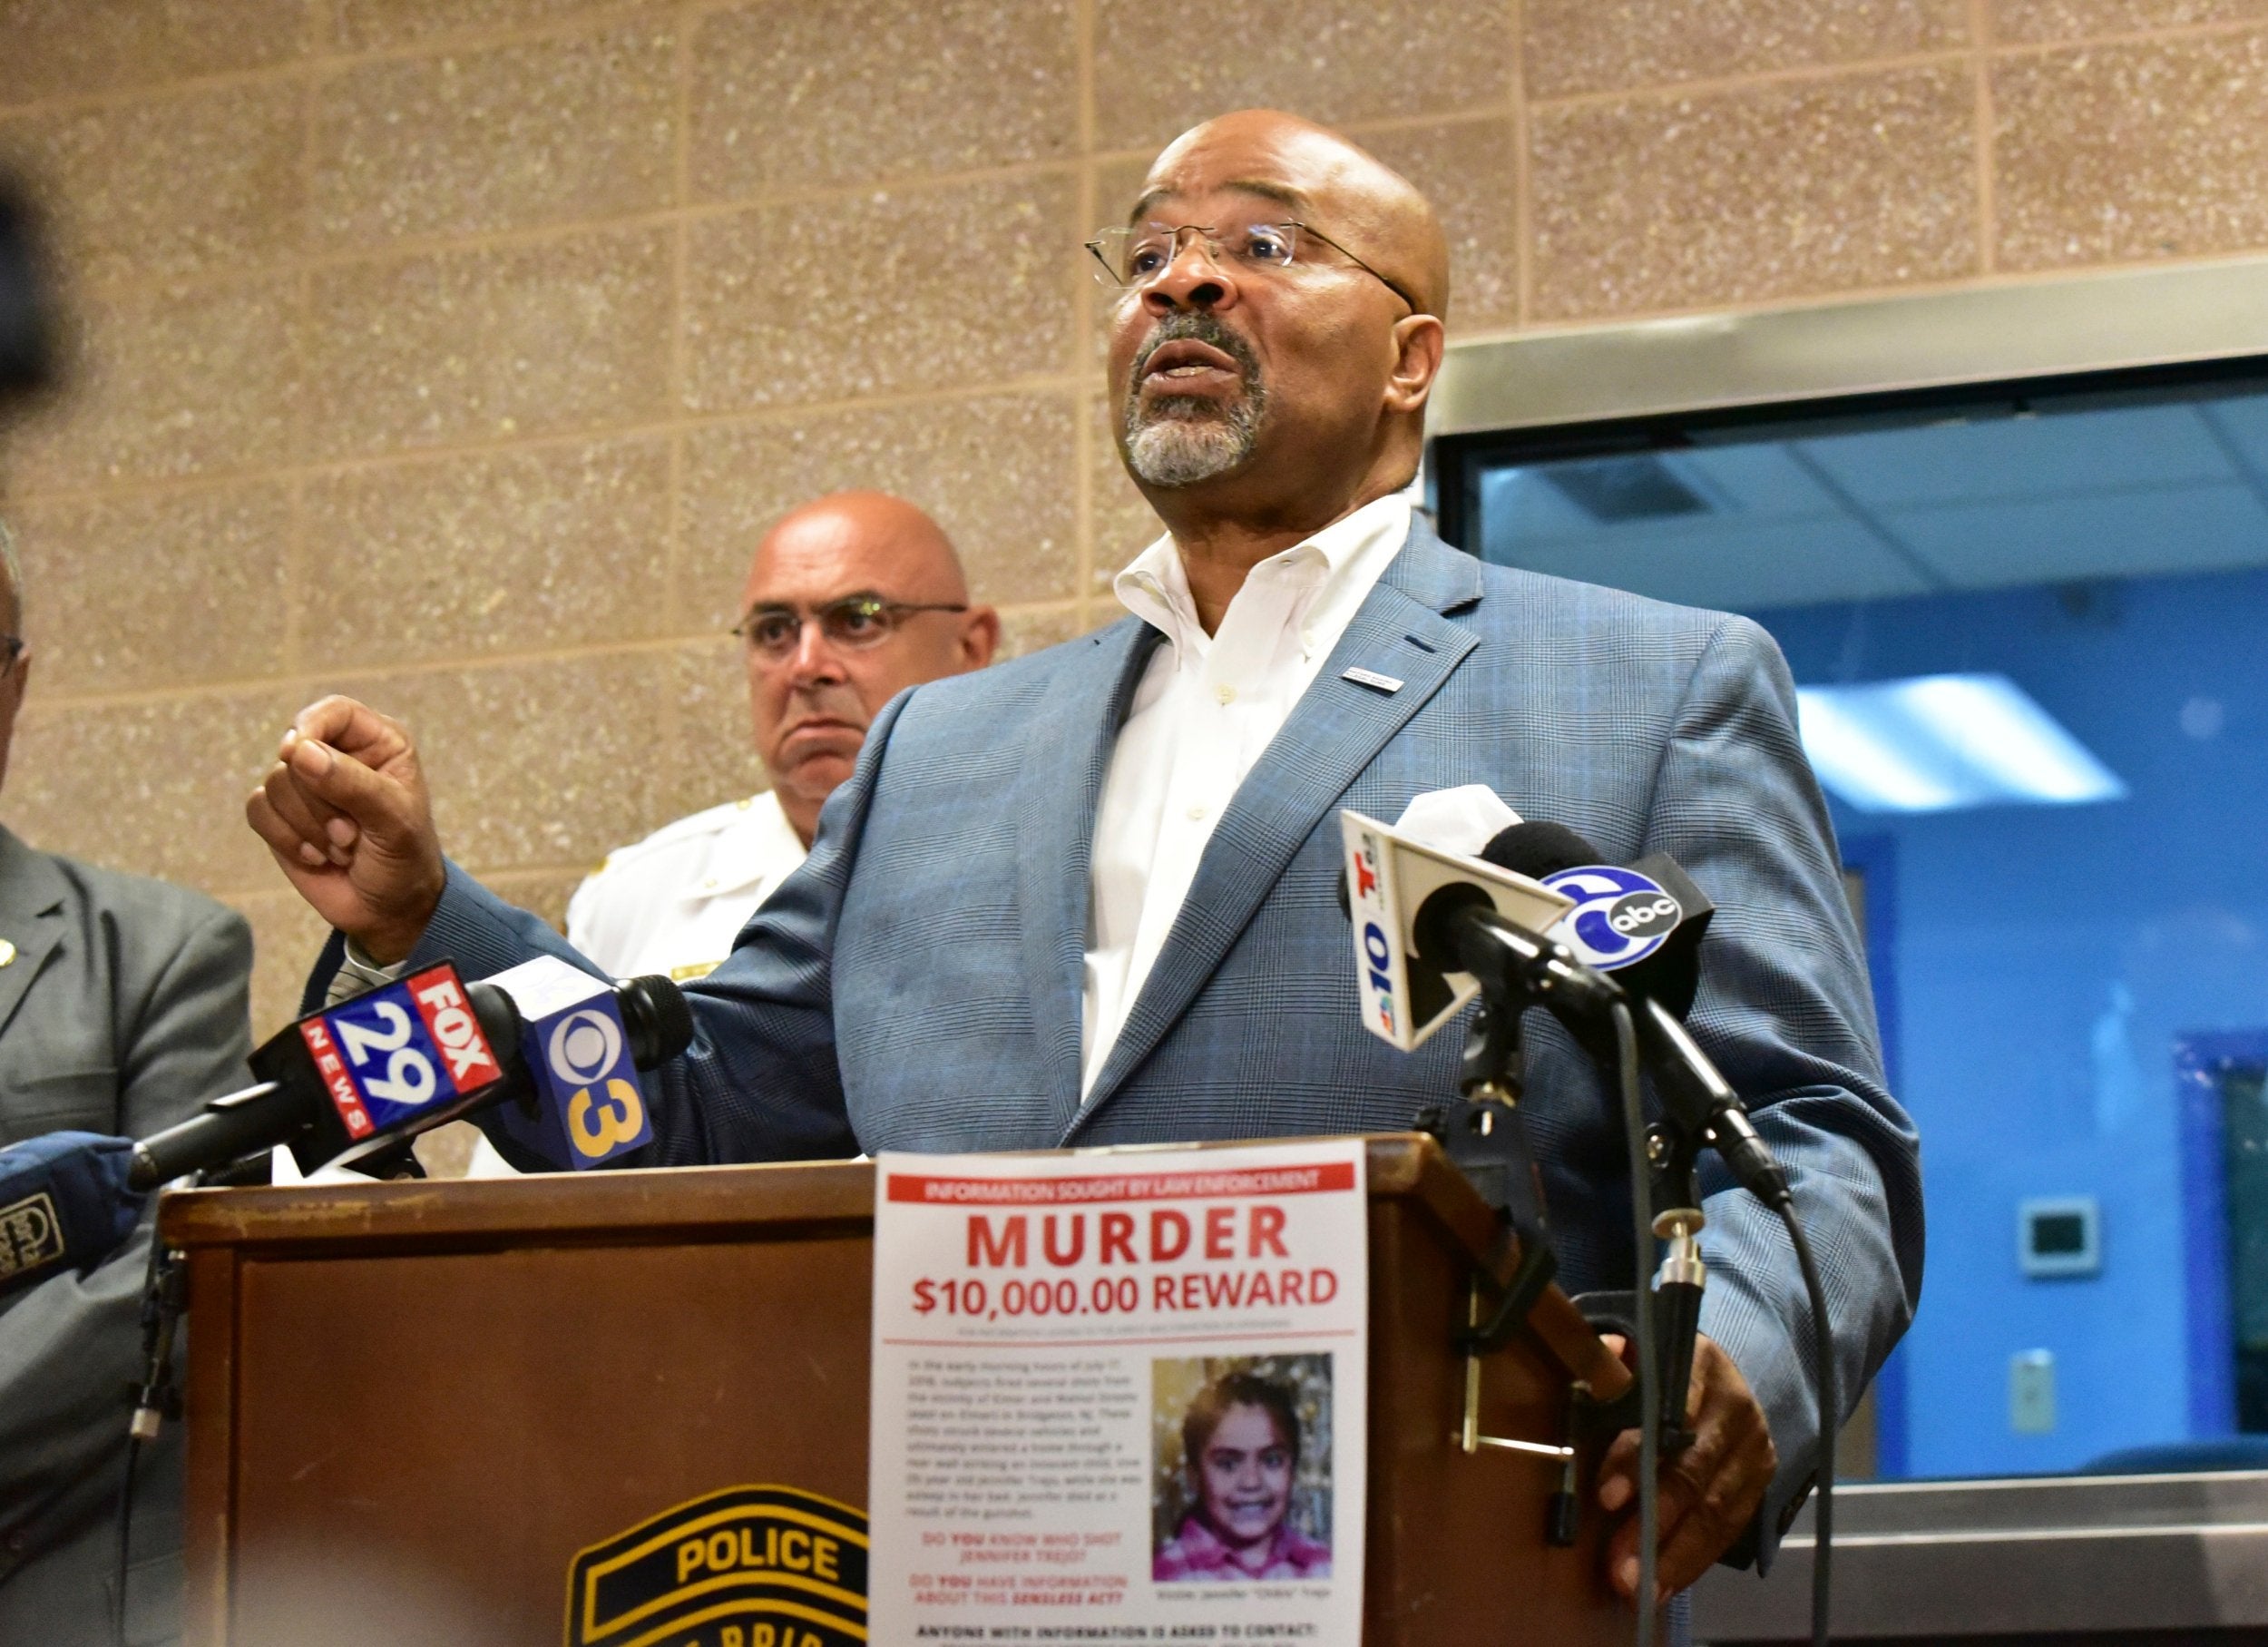 Bridgeton Mayor Albert Kelly discusses the fatal shooting of the young girl during a news conference at the Bridgeton Police Department